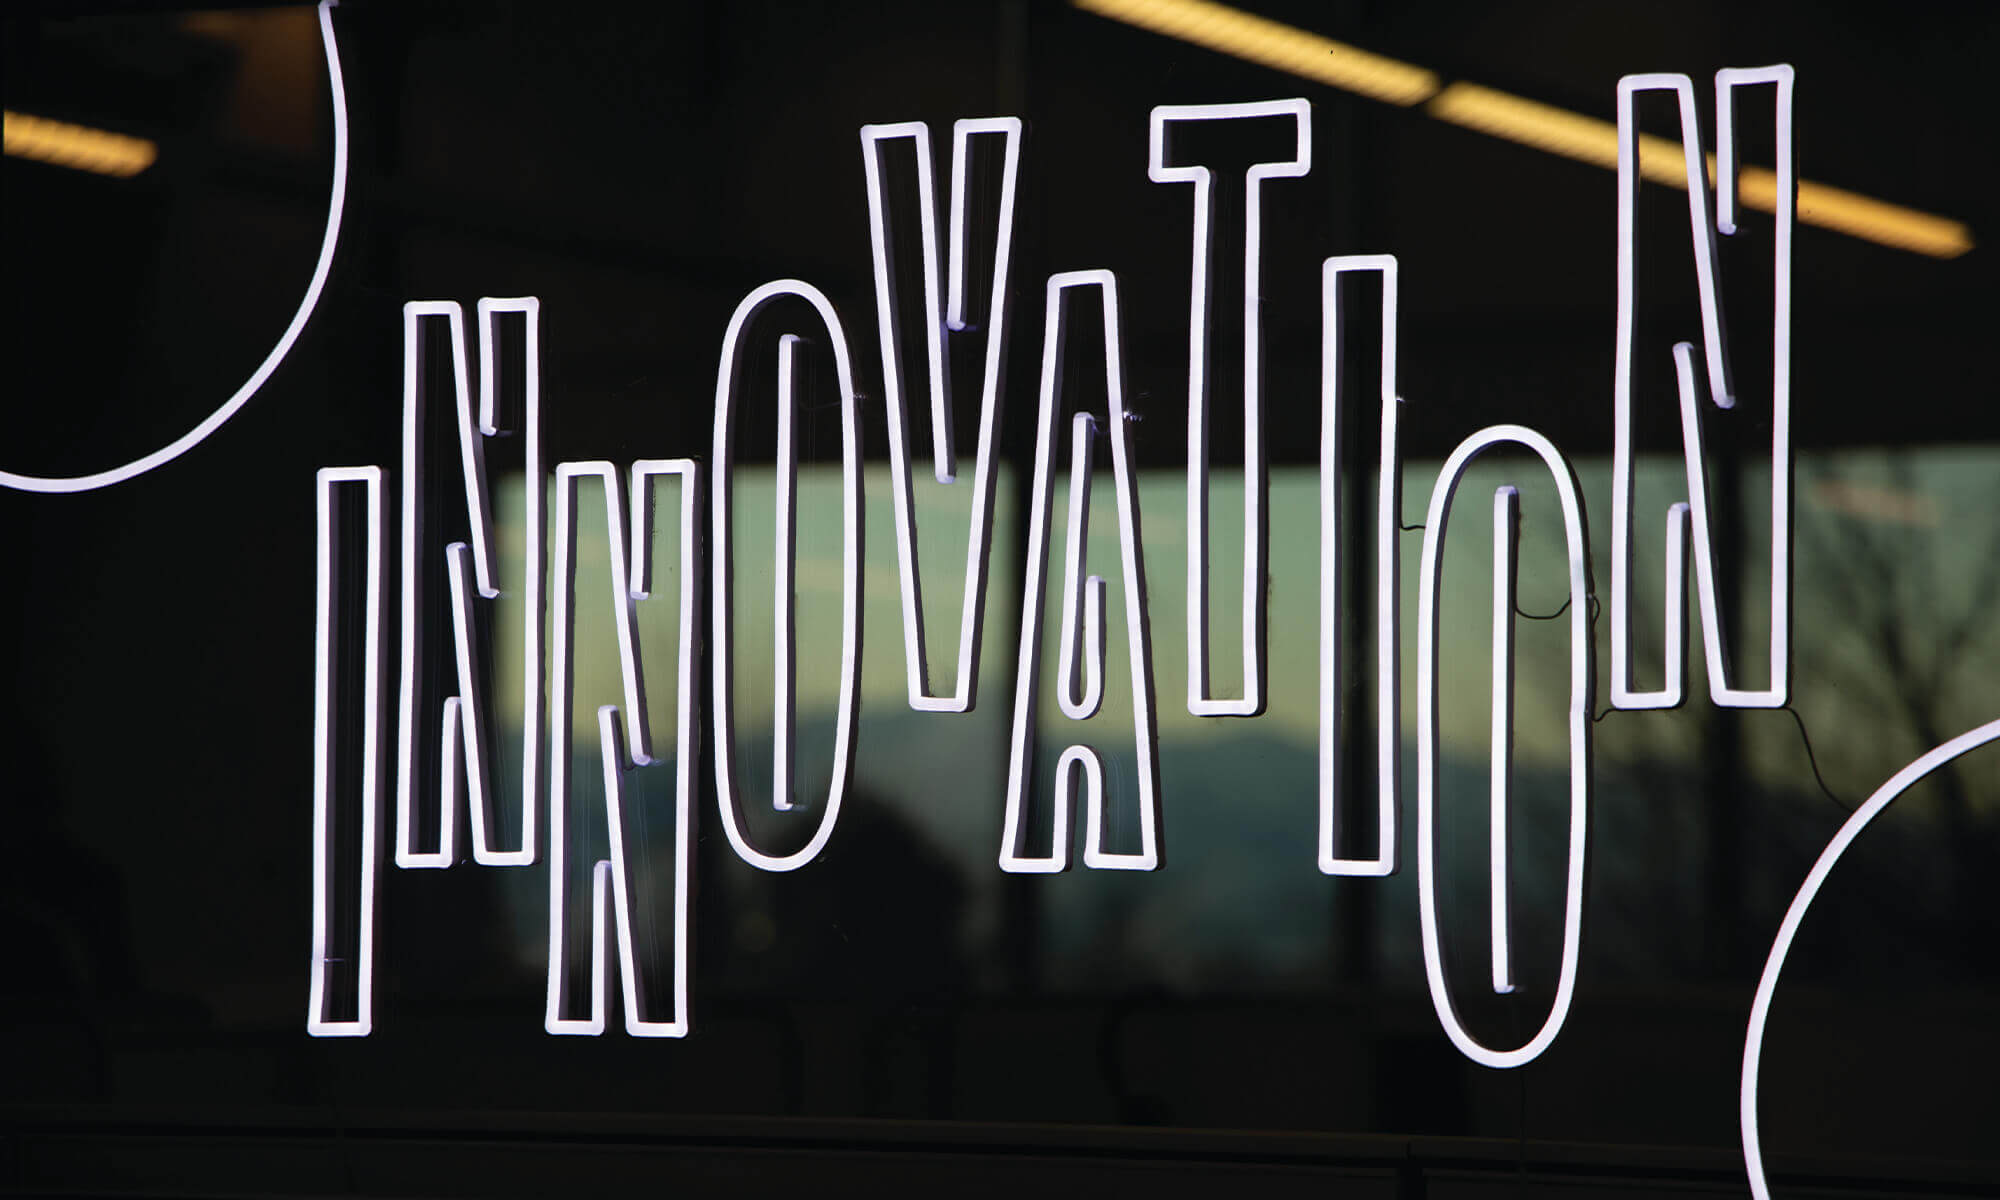 White LED tubing letterforms spelling out the word INNOVATION on glass panel with background reflections